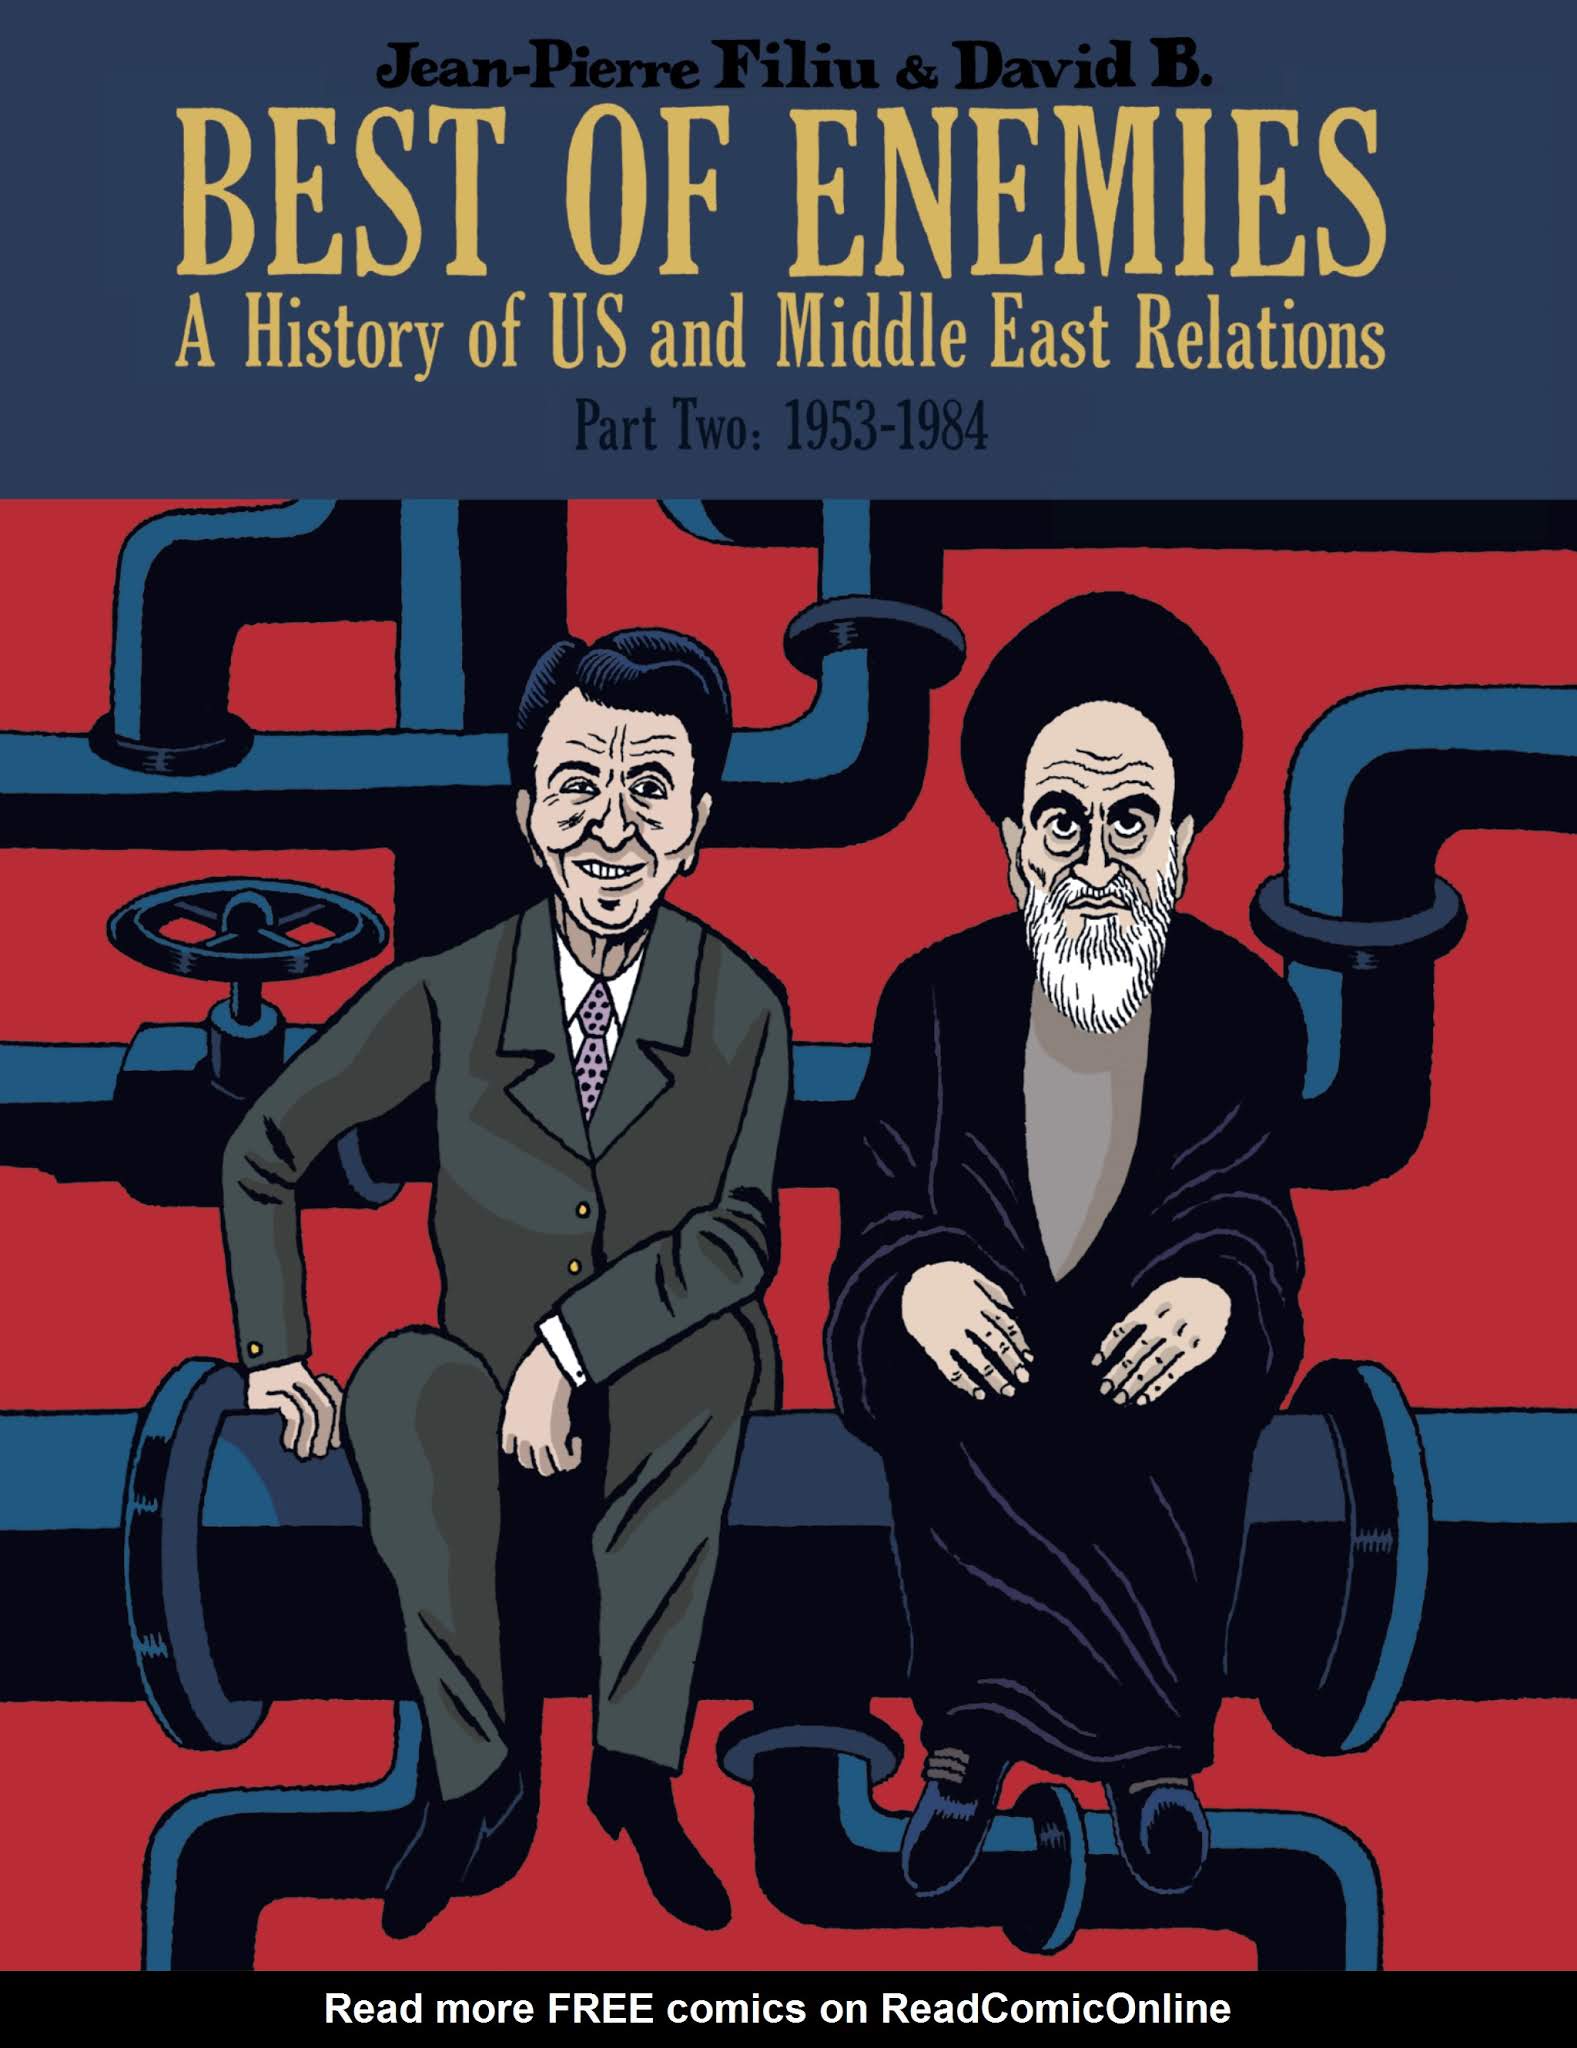 Read online Best of Enemies: A History of US and Middle East Relations comic -  Issue # TPB 2 - 1